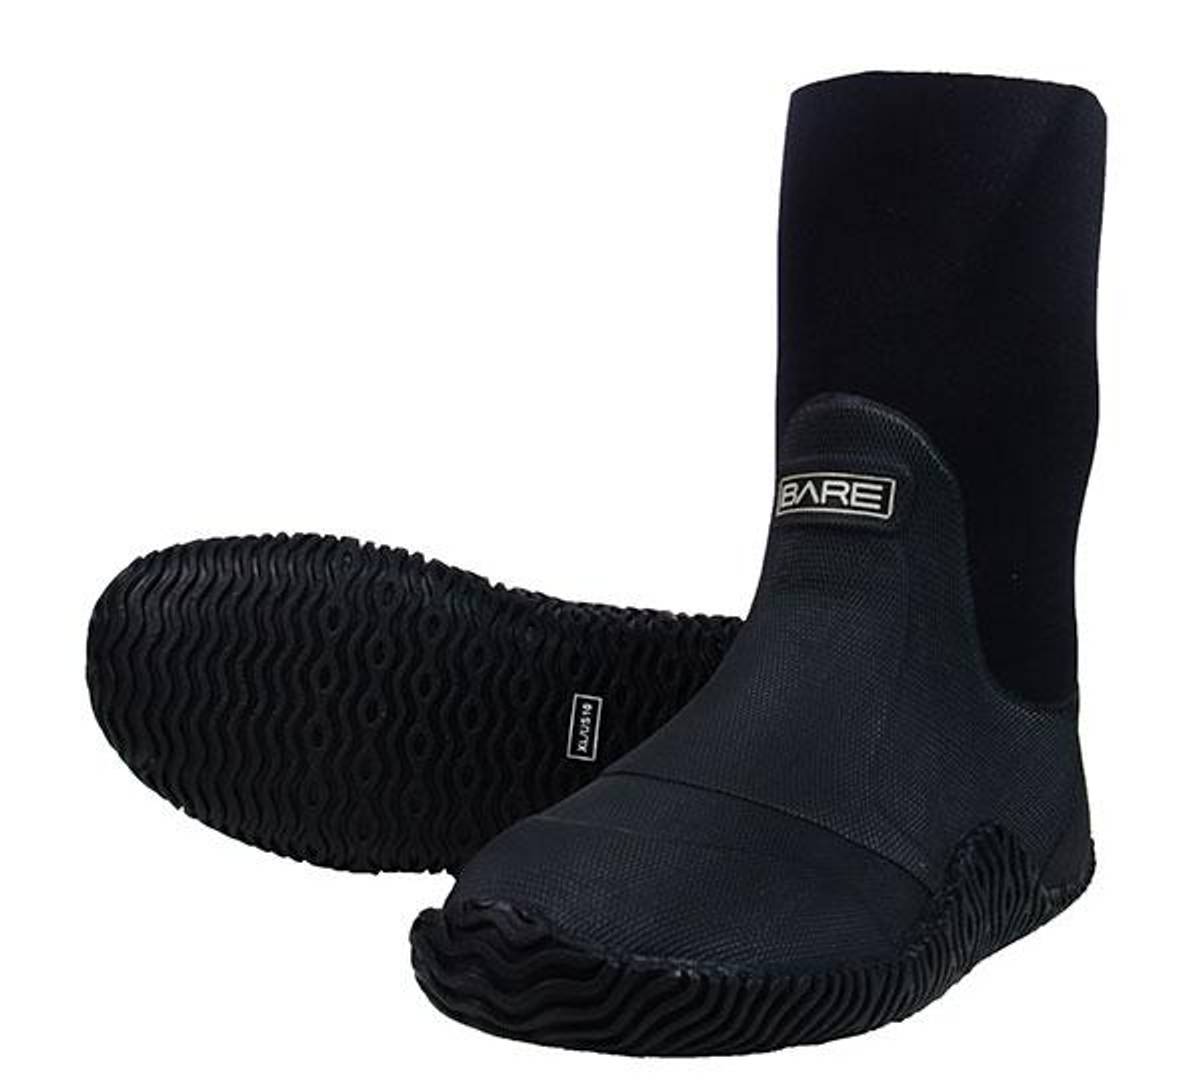 ONLY HD boots (dry suit)